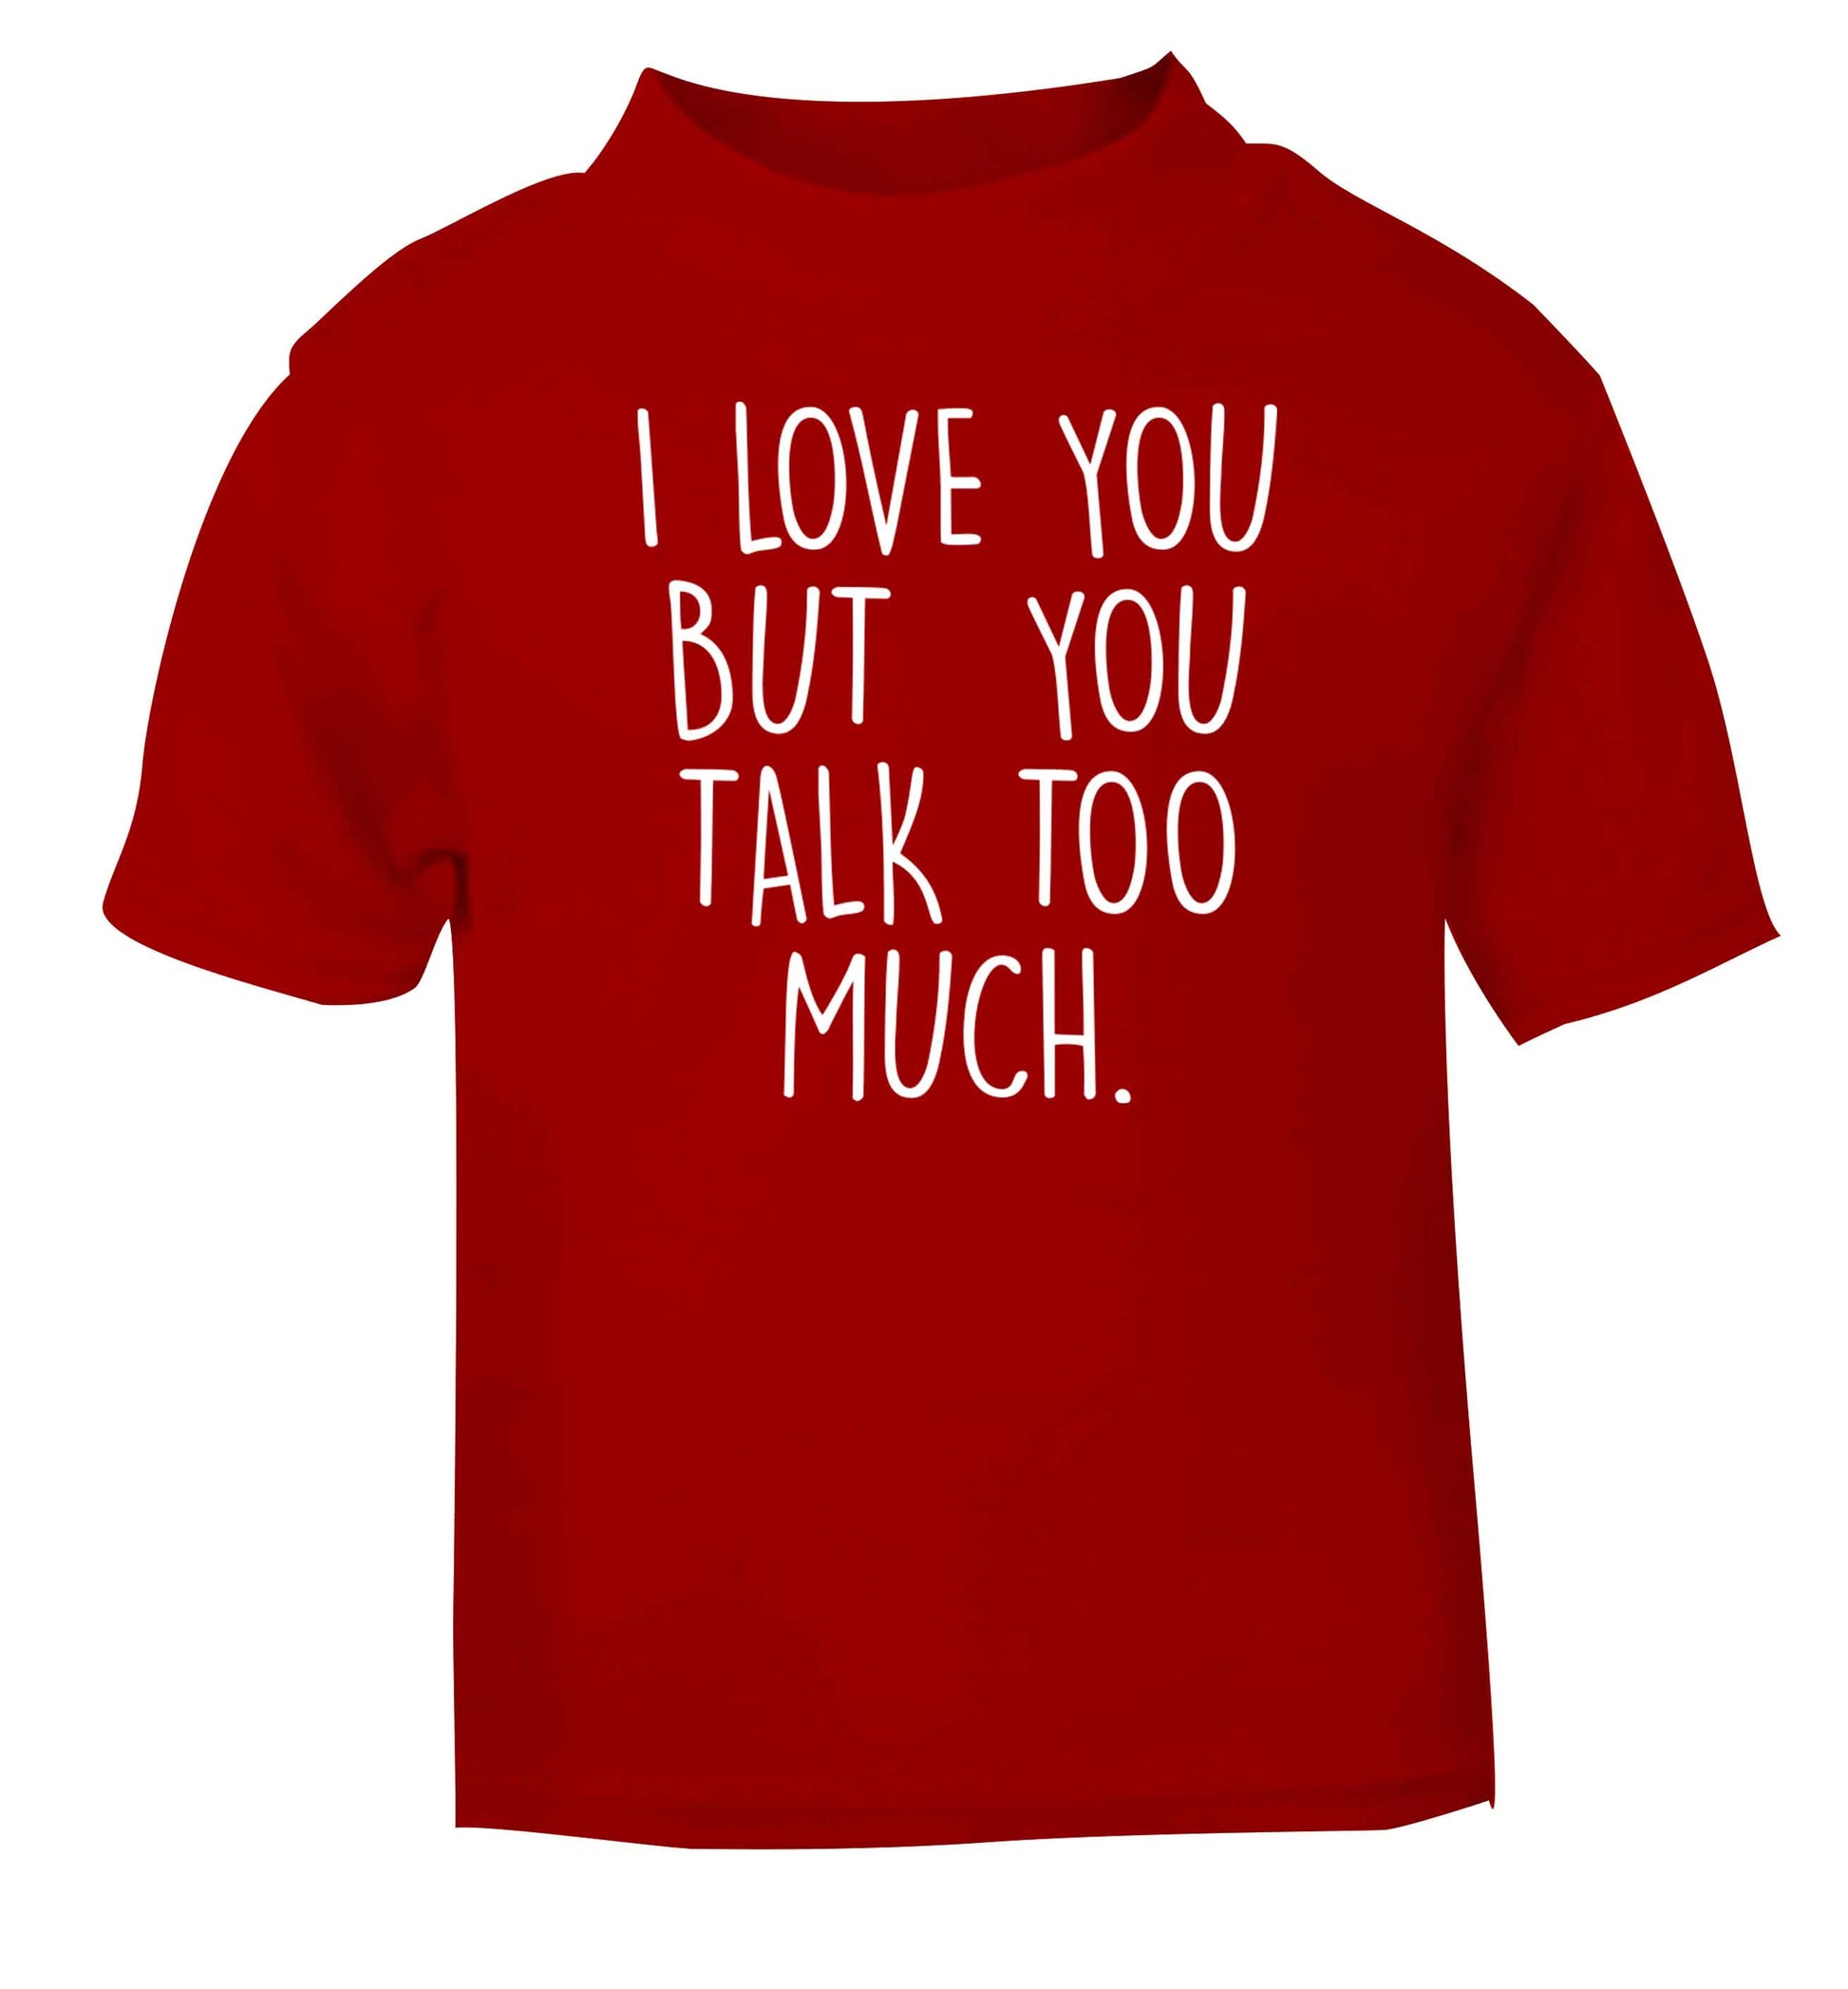 I love you but you talk too much red baby toddler Tshirt 2 Years